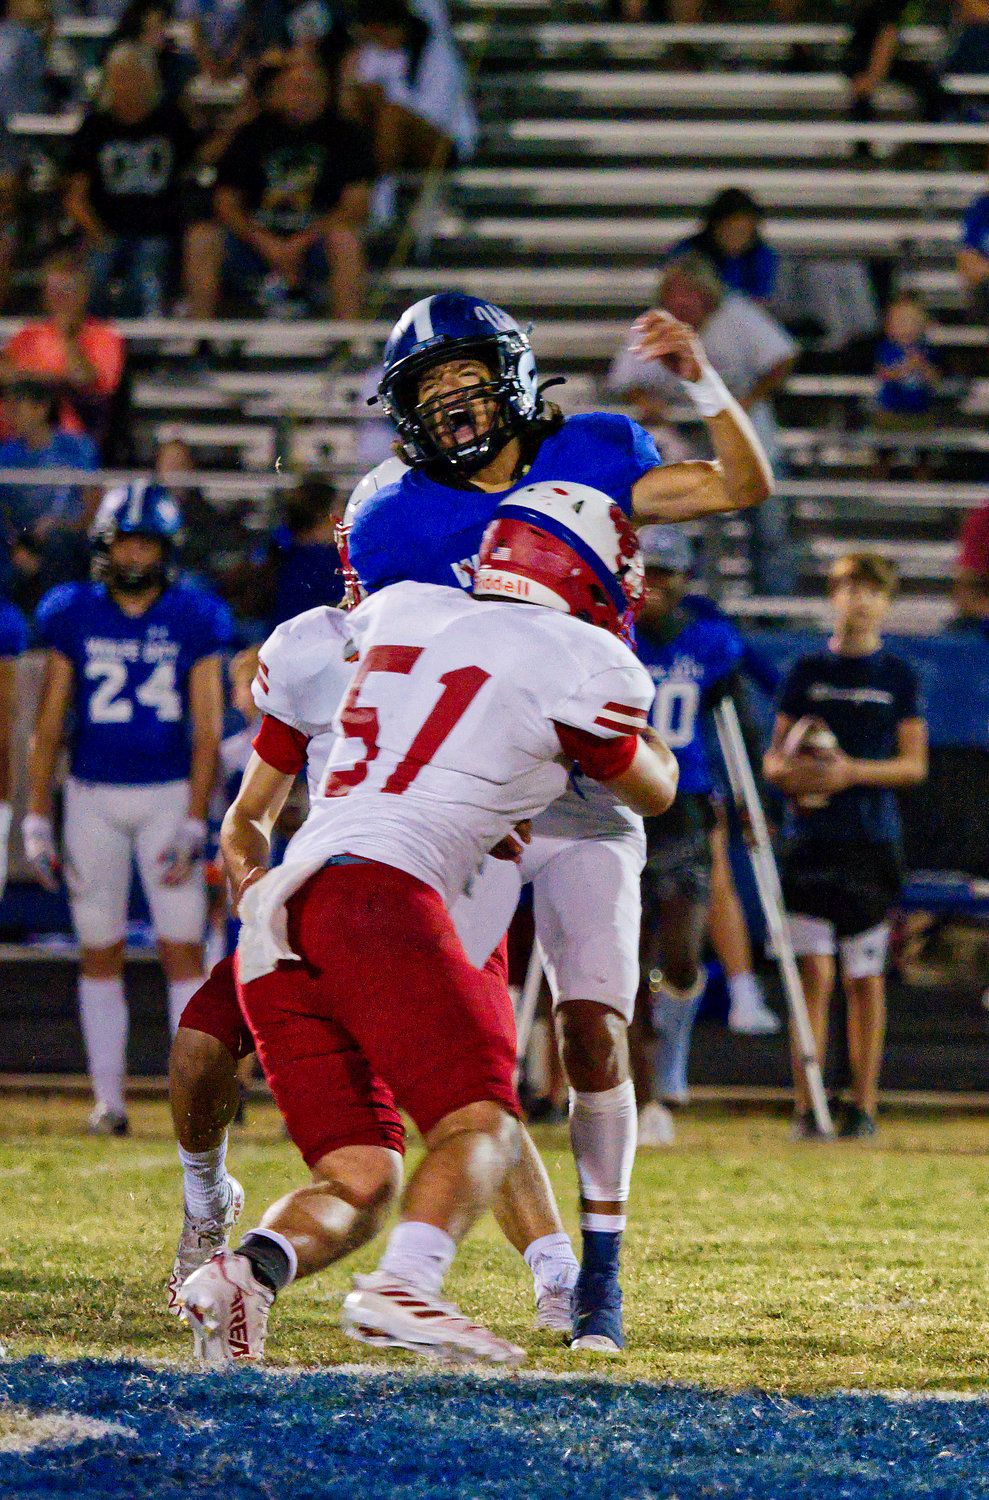 Jason Langston applies pressure to the Wolfe City quarterback shortly after the pass was away. [find more football photos]